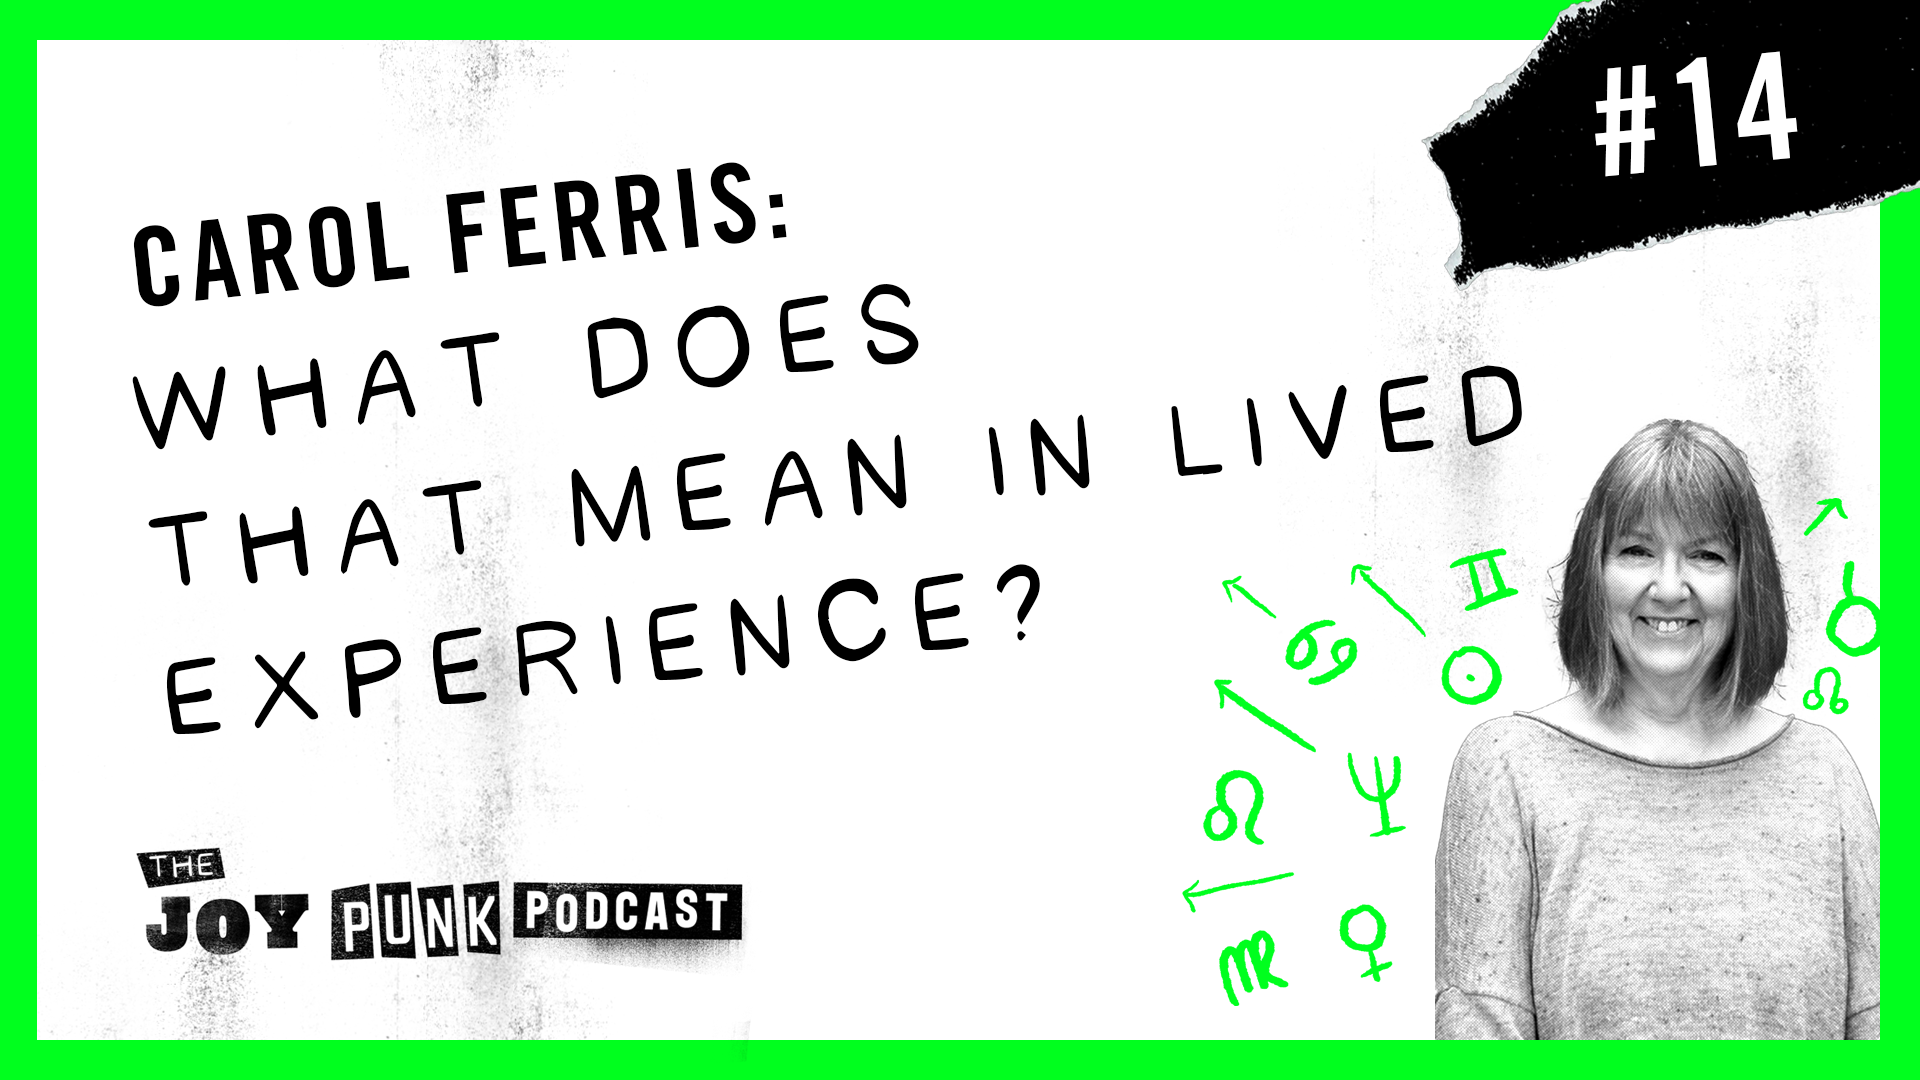 #14 Carol Ferris: What Does That Mean In Lived Experience